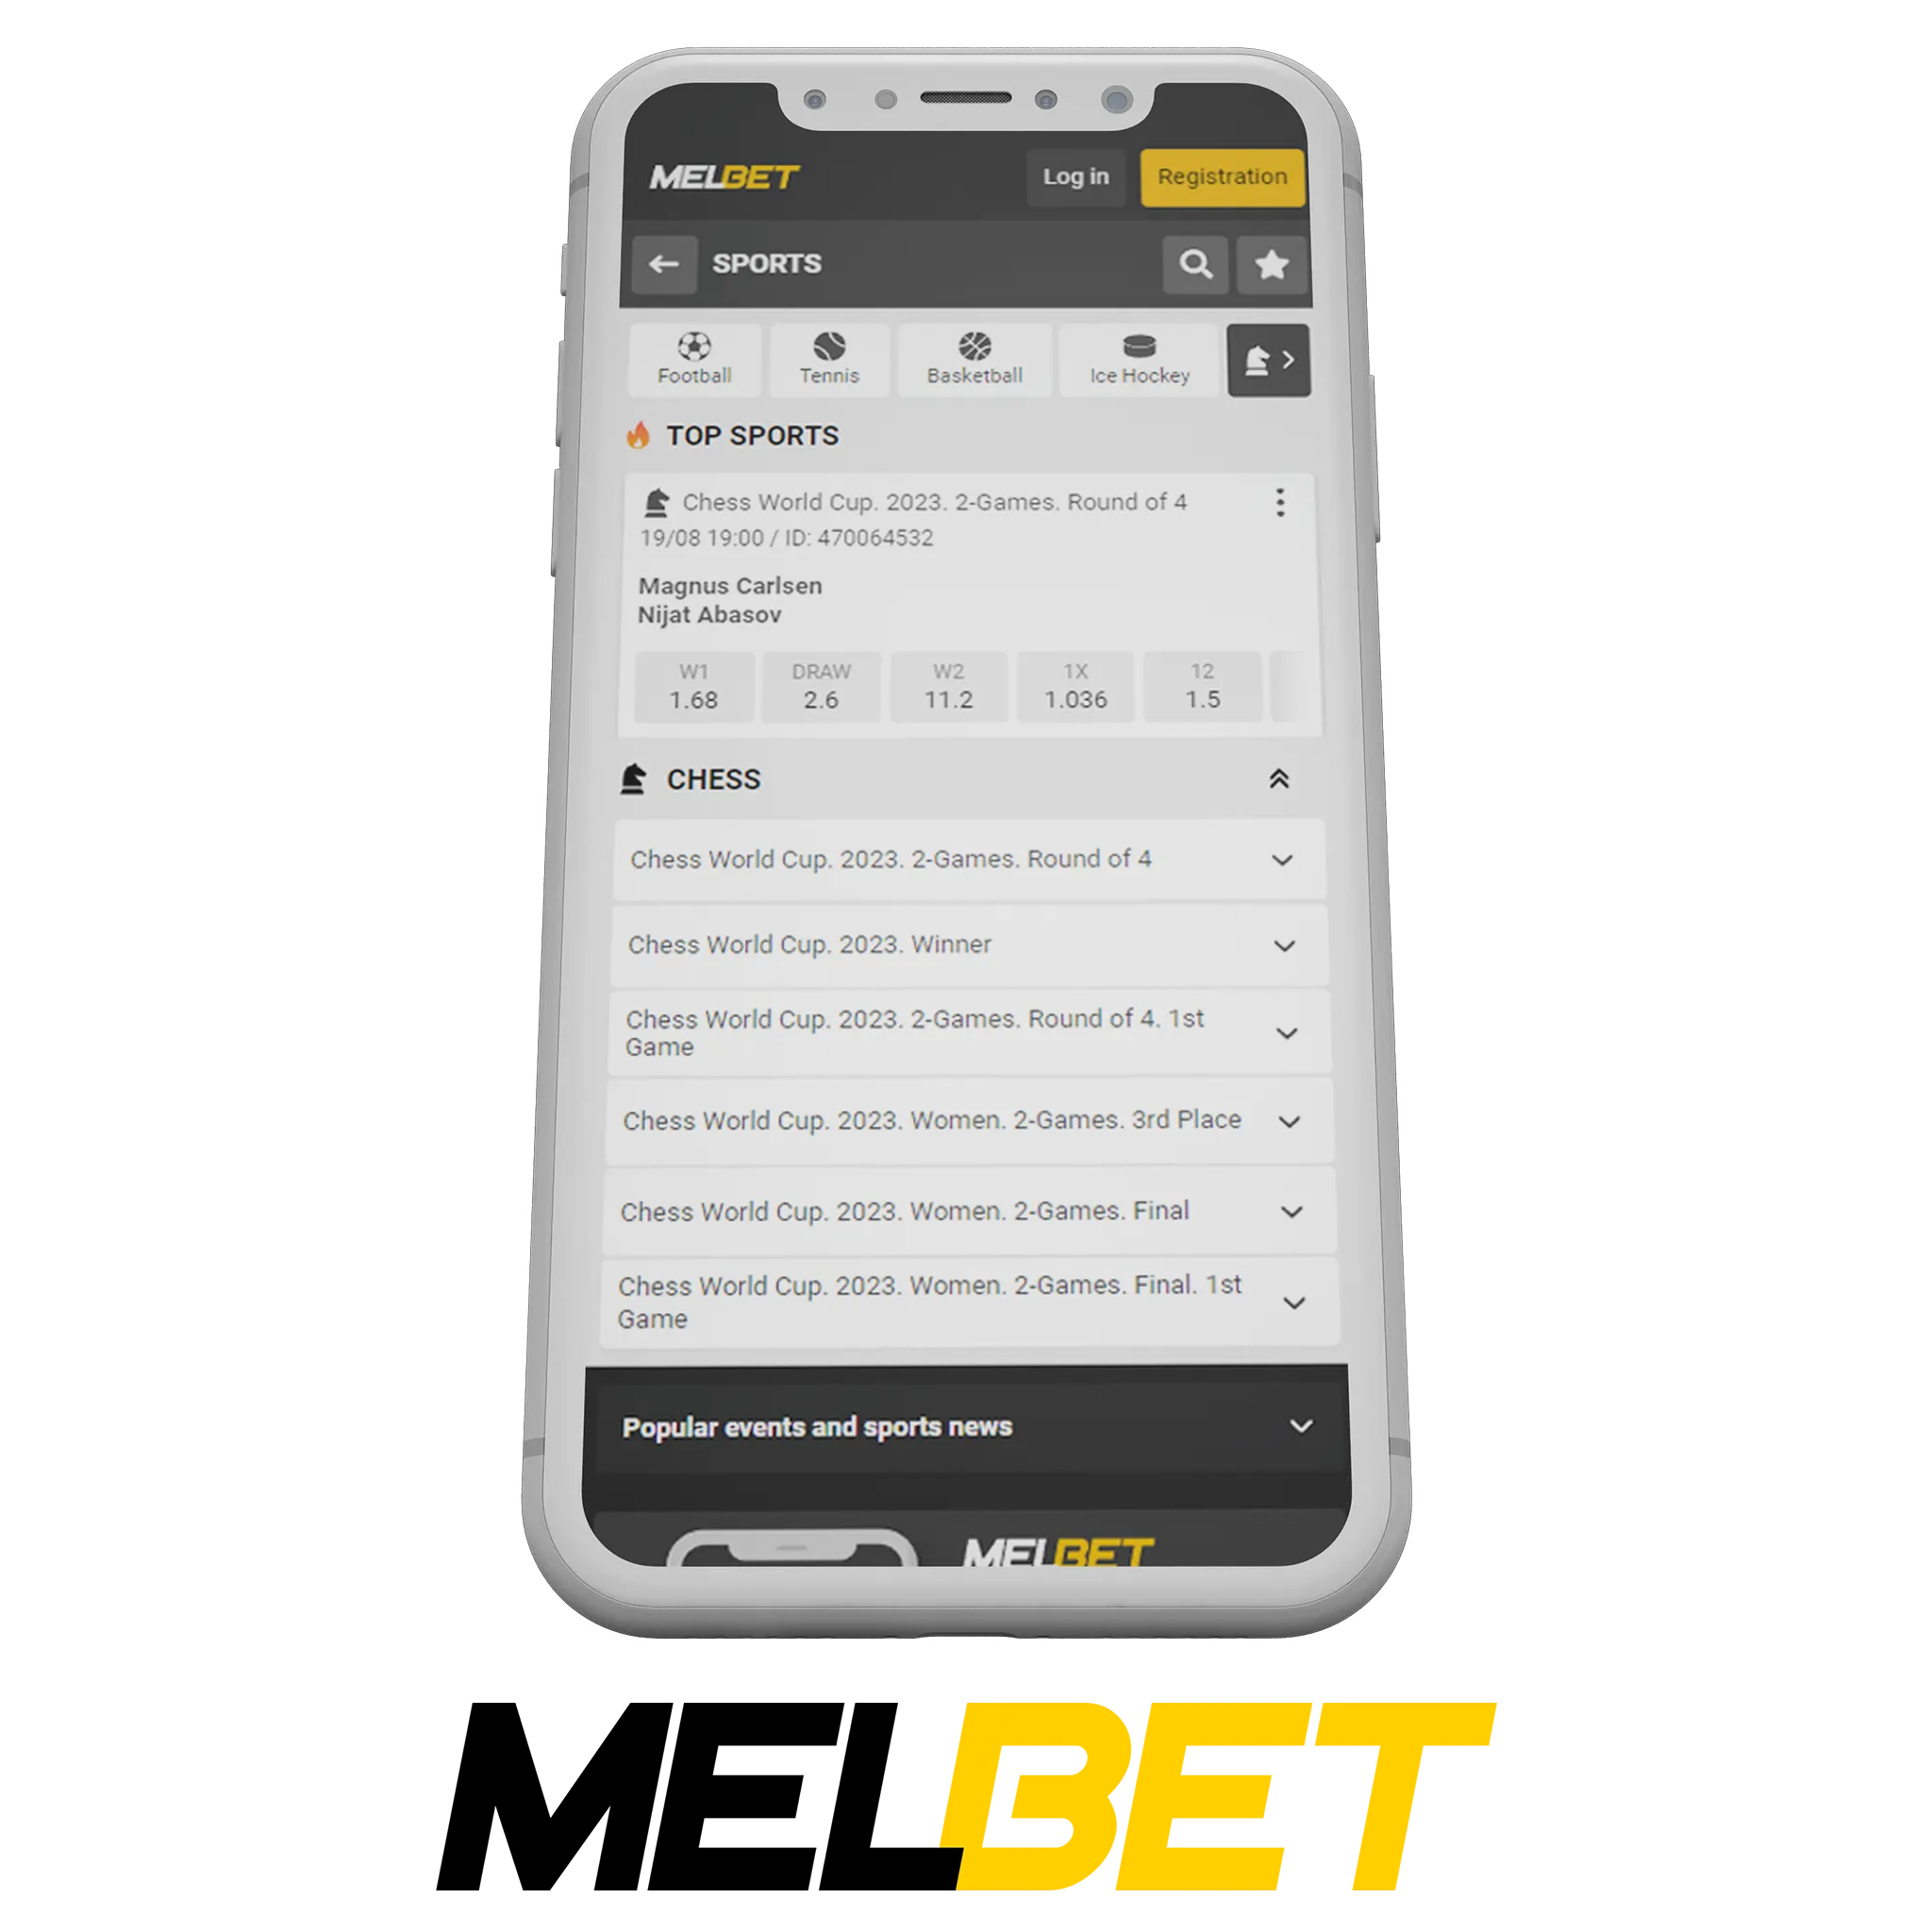 The Melbet app has many advantages for chess betting.